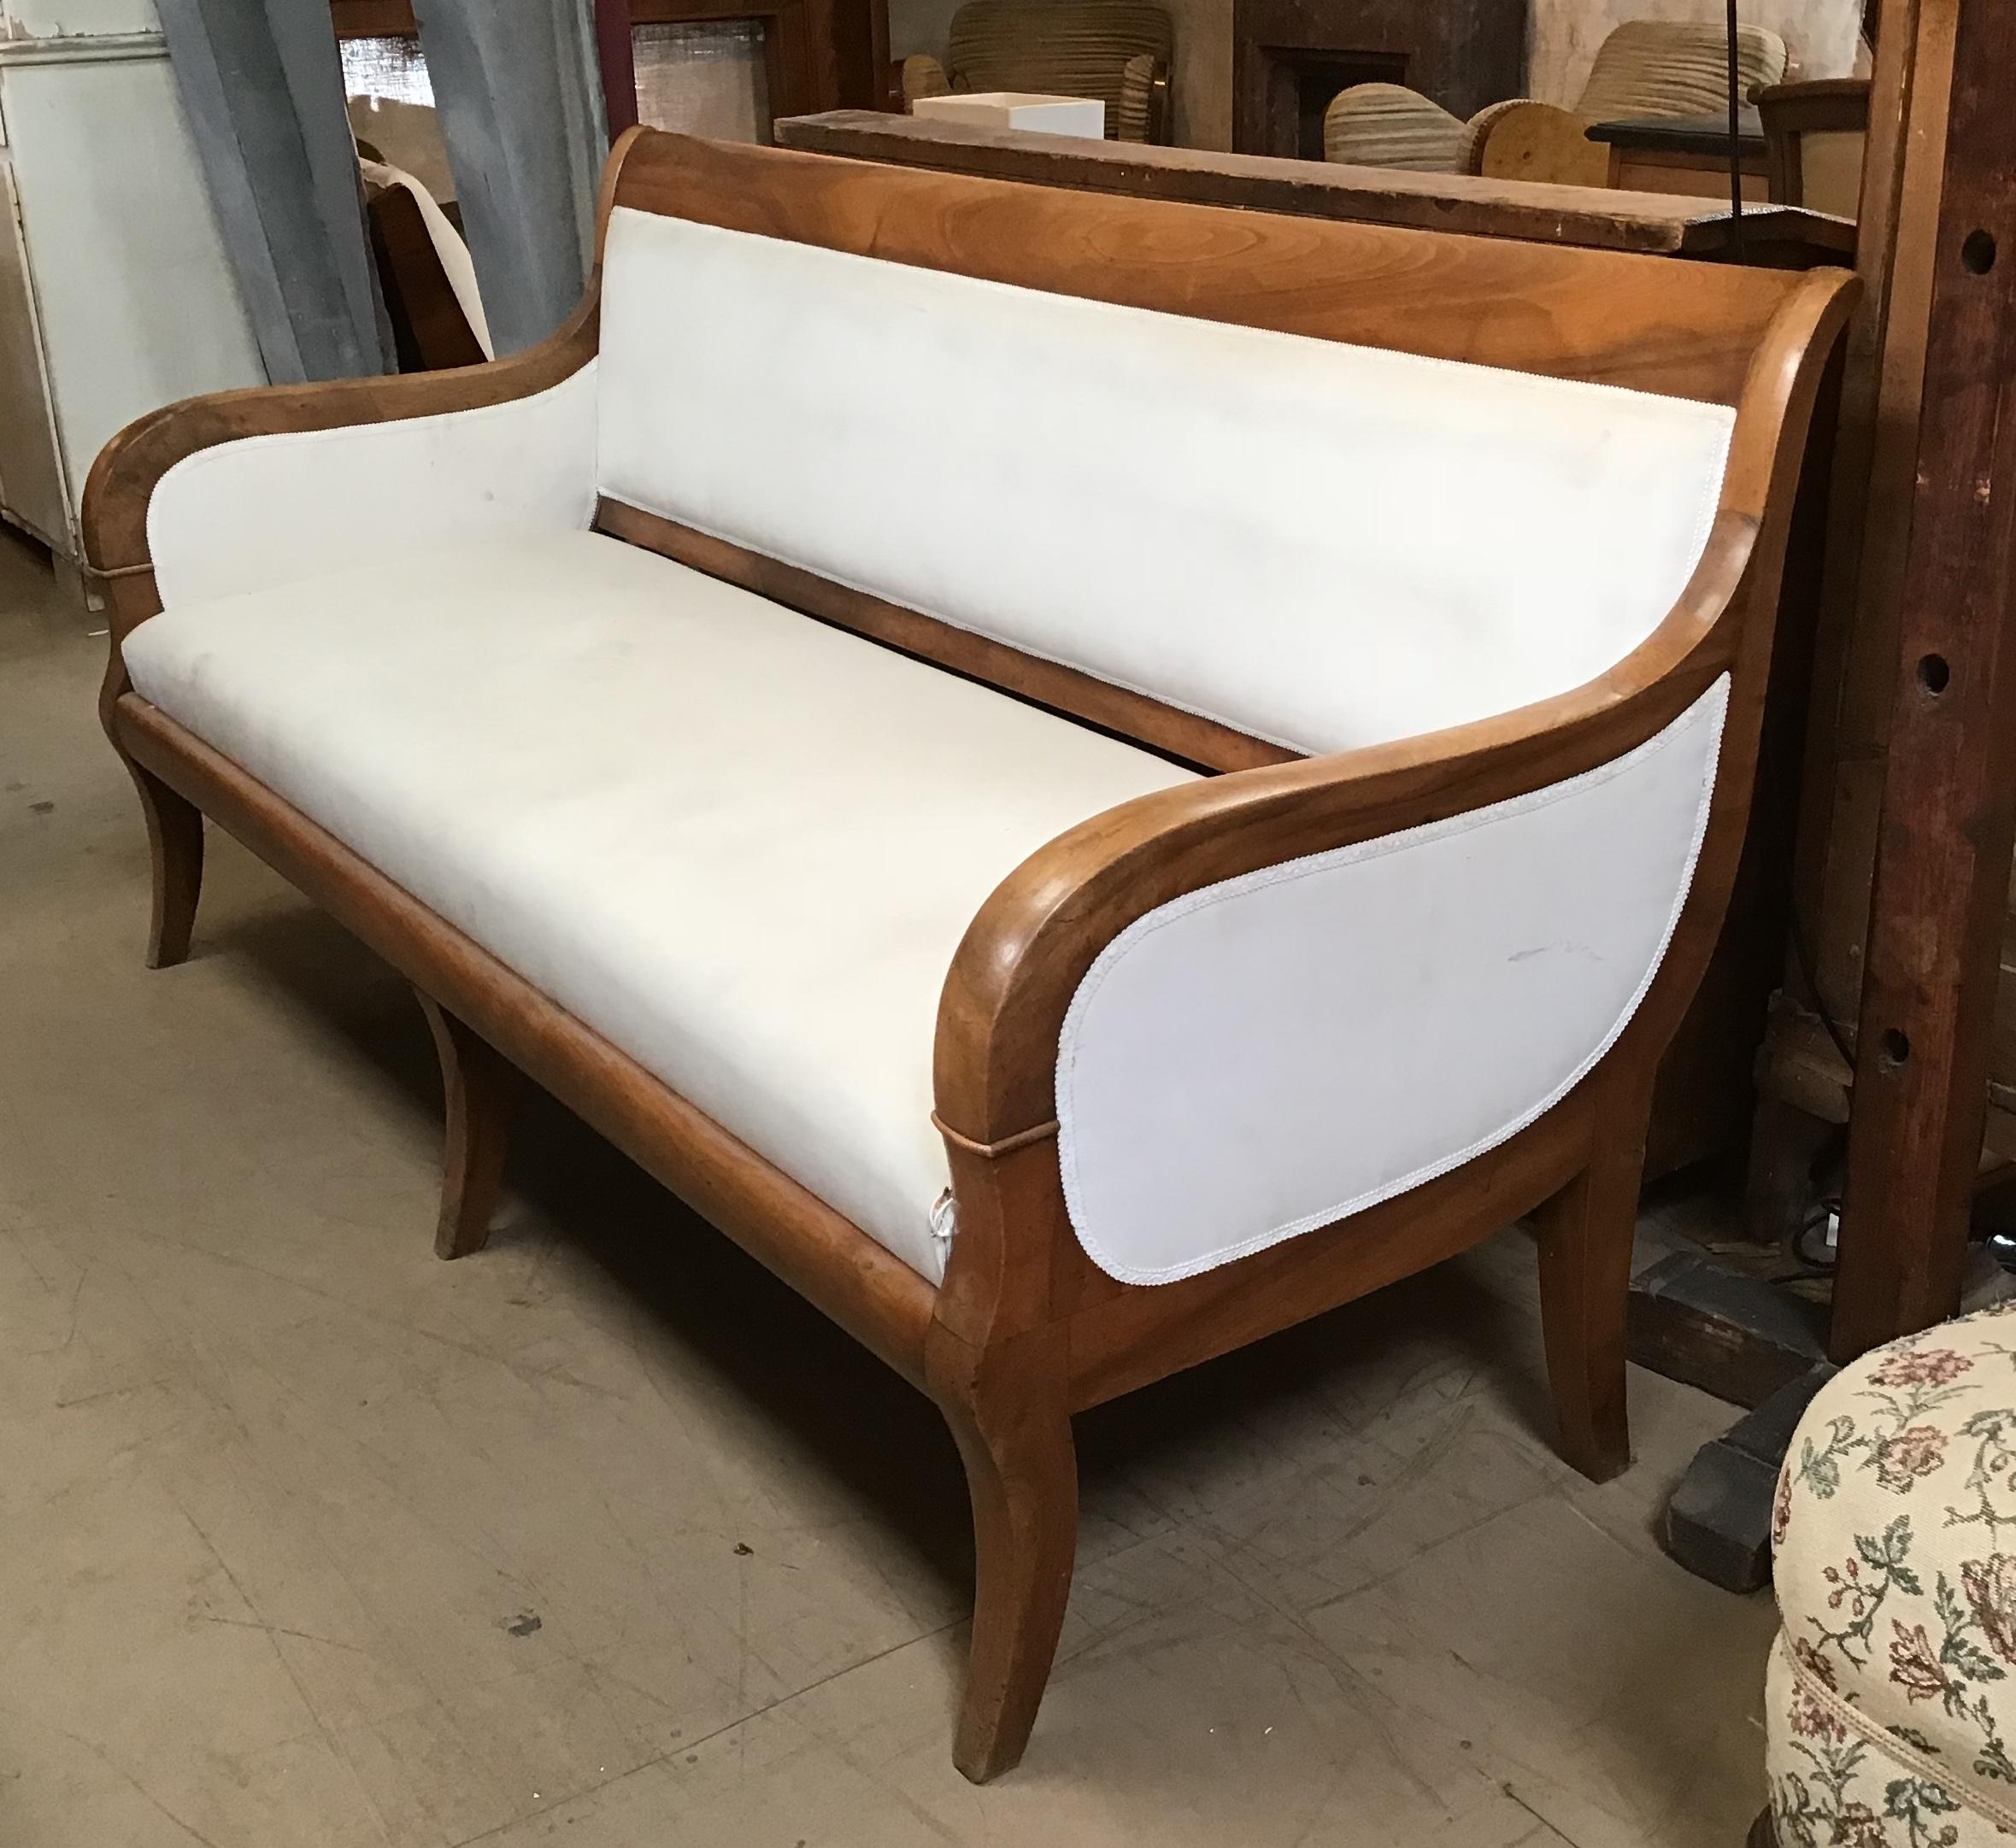 Italian walnut sofa with white upholstery from 1920s.
This sofa has already been completely restored.